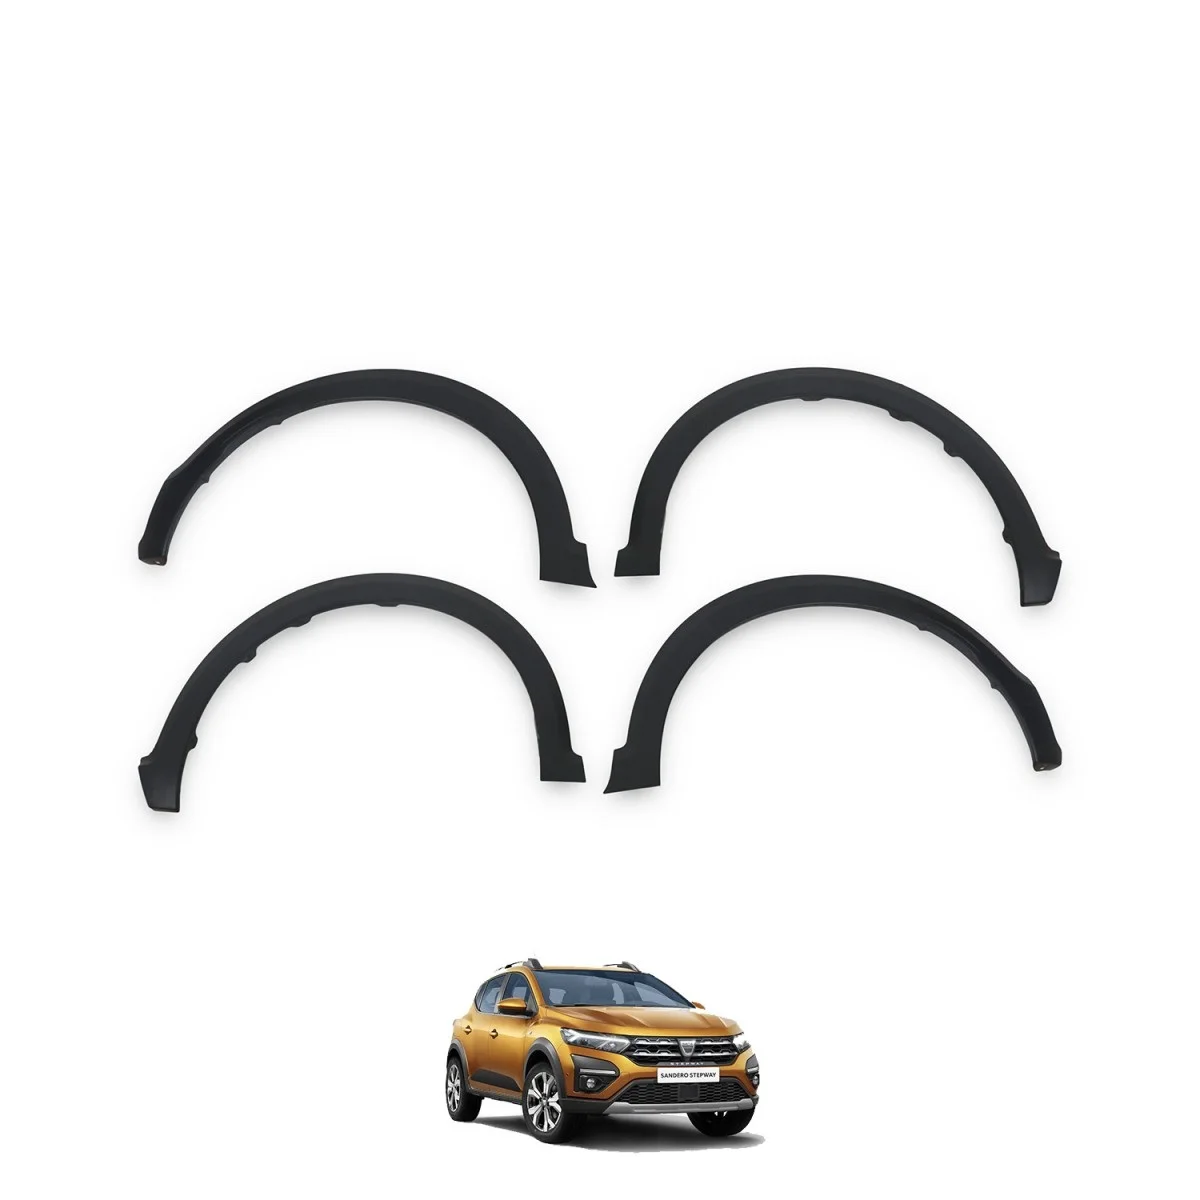 

For Dacia Sandero 2021 and later Models SIDE HOOD PROTECTOR 4 Pieces --Door Dodik Set Spare Part Flap Auto Styling Accessories